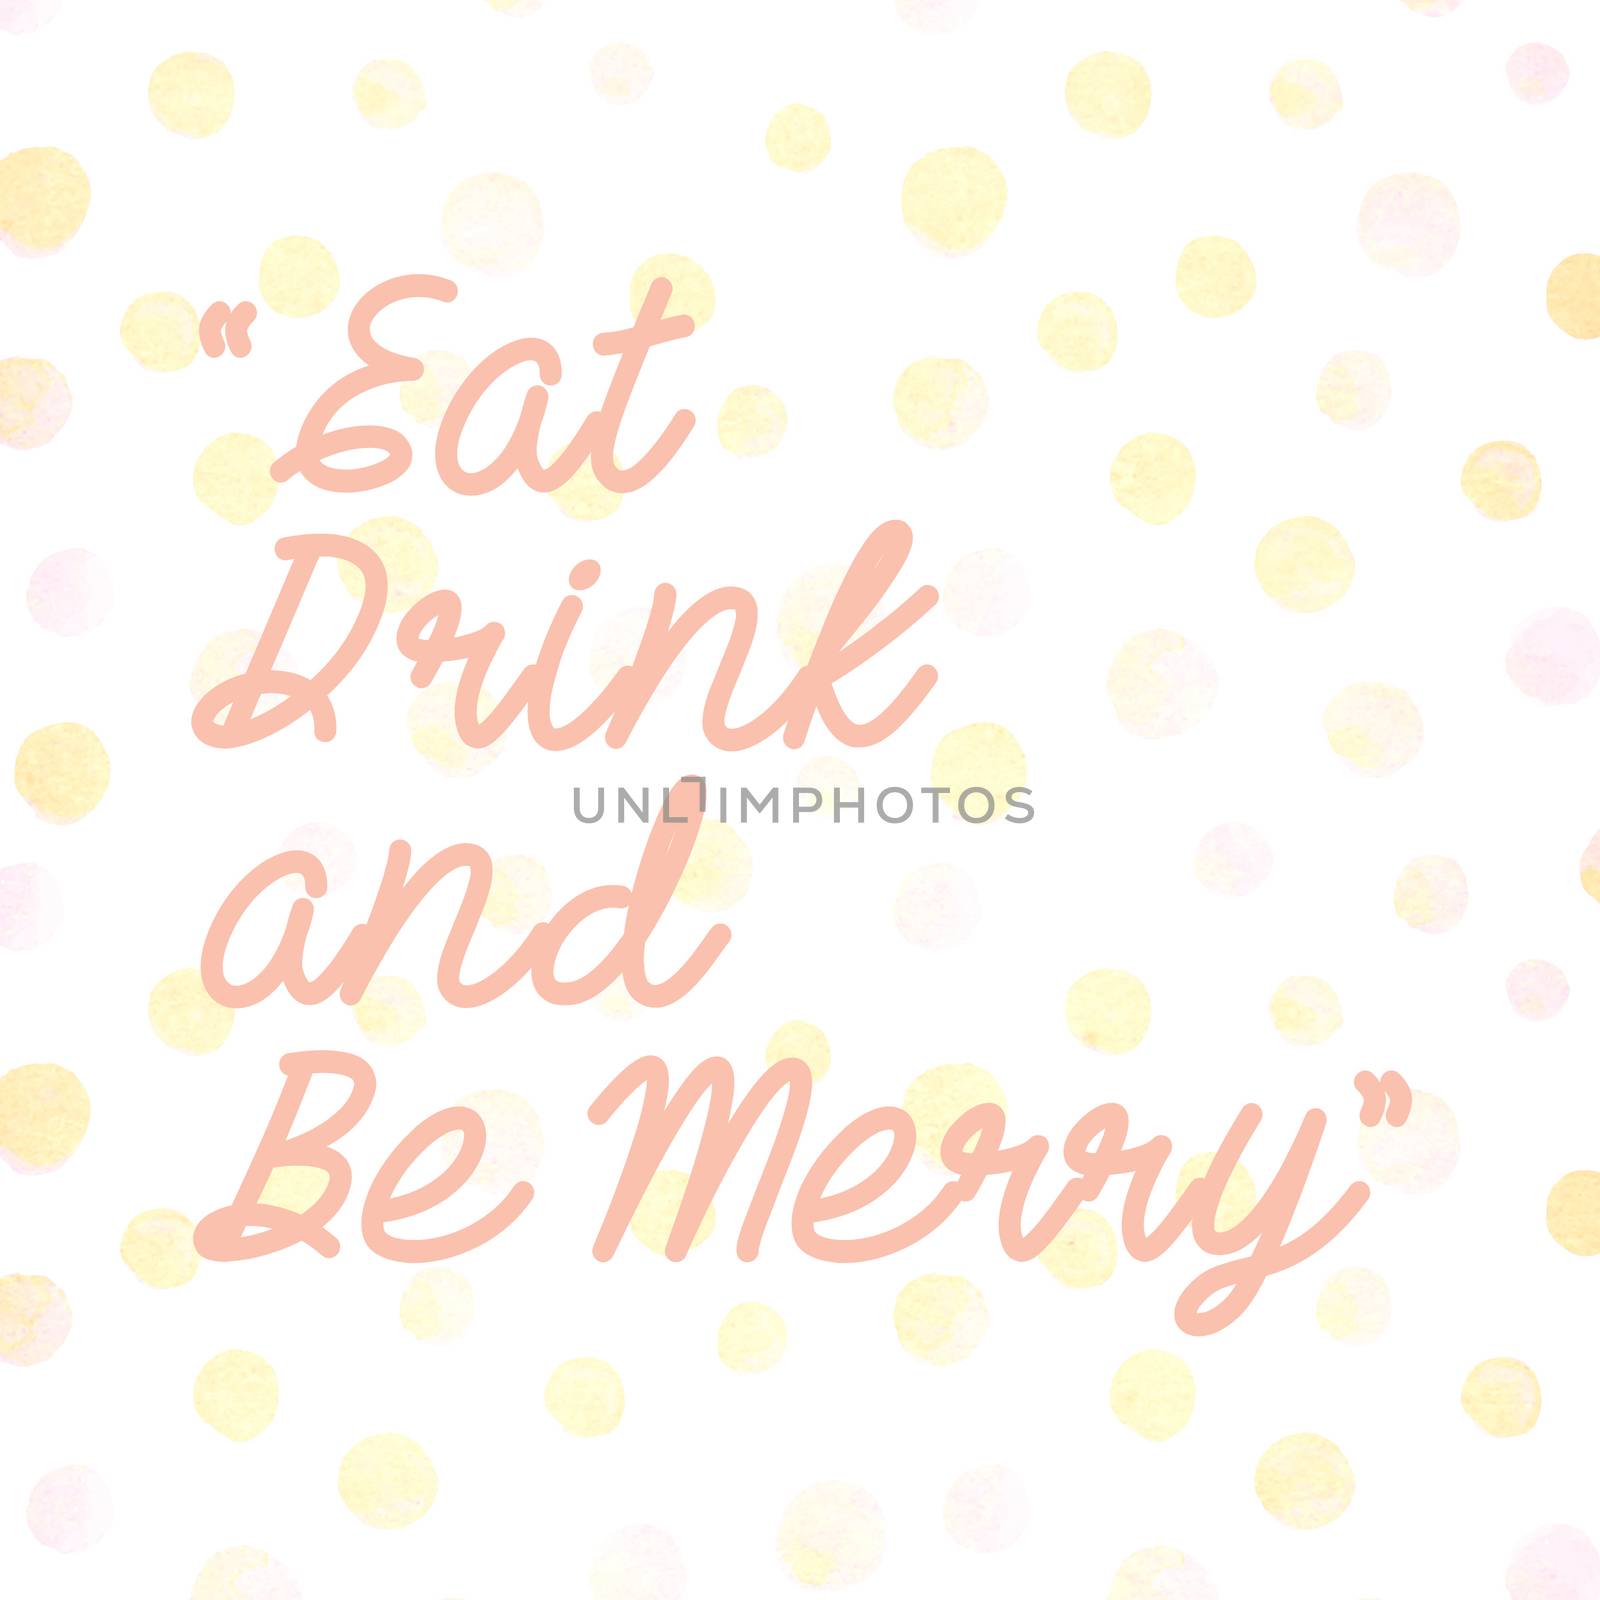 Inspirational motivating quote for holiday concept by nuchylee